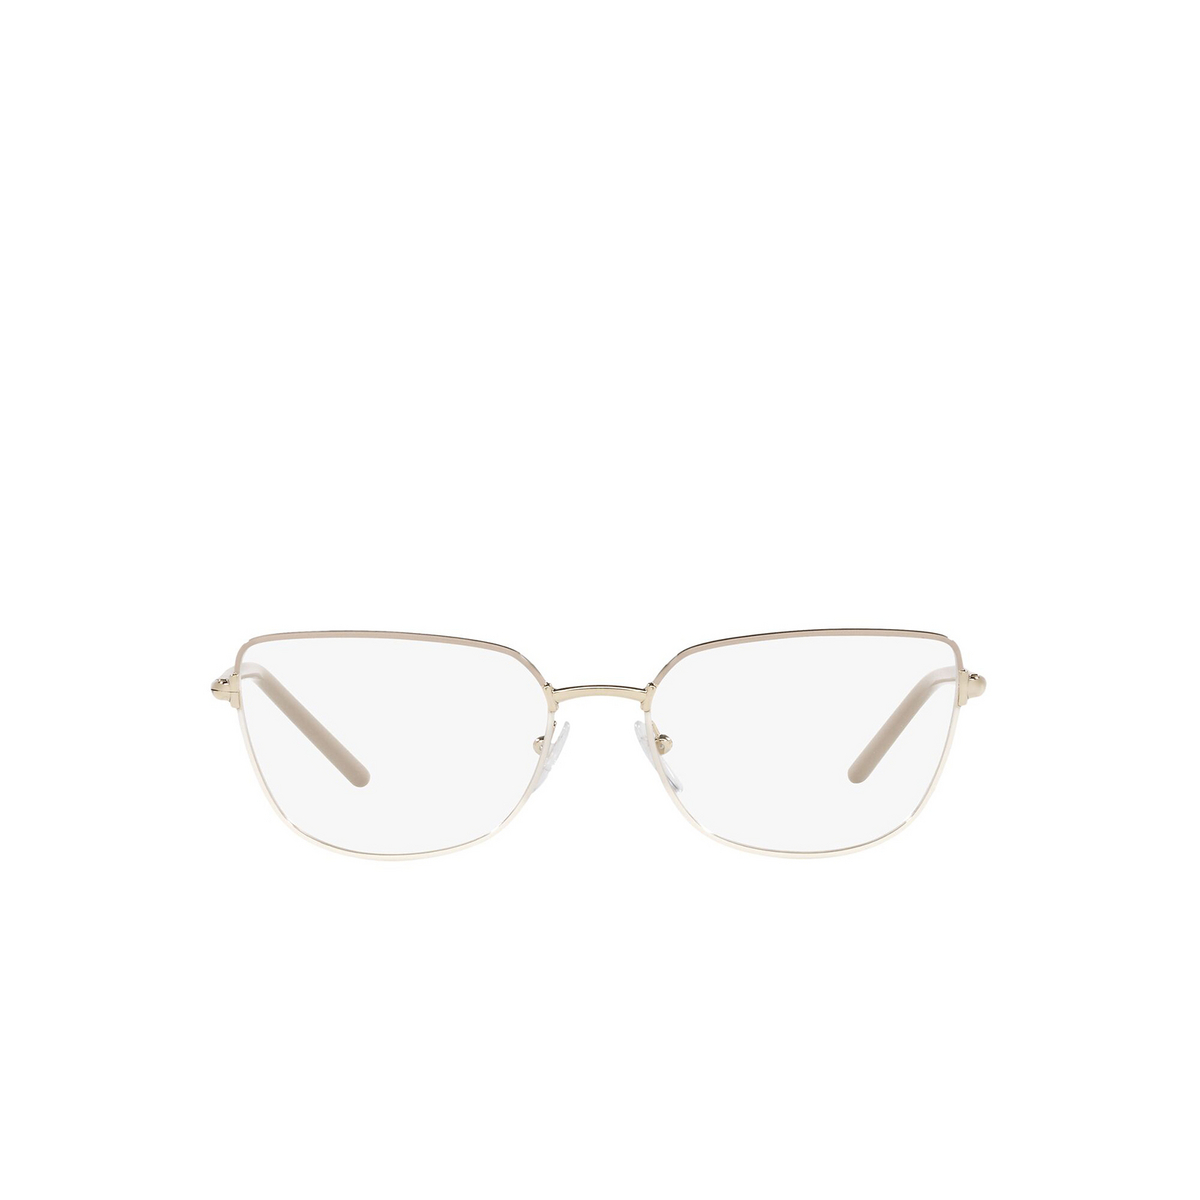 Prada® Butterfly Eyeglasses: PR 59YV color Pale Gold ZVN1O1 - front view.